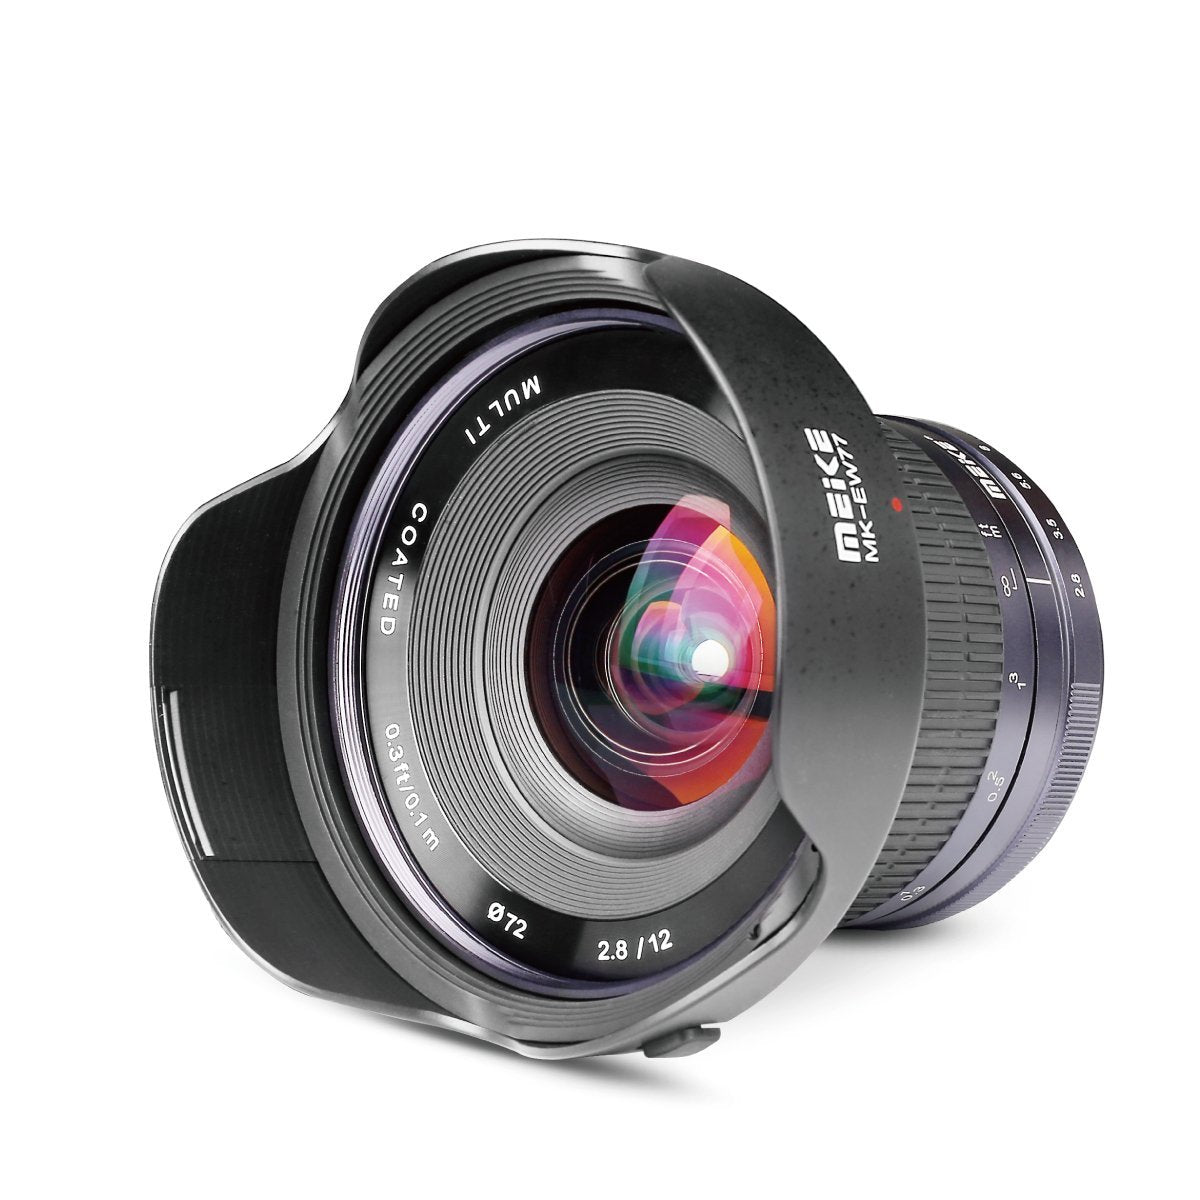 Meike MK-12mm 12mm f/2.8 Ultra Wide Angle Manual Fixed Lens for MFT Micro Four Thirds Panasonic Olympus Mirrorless Camera